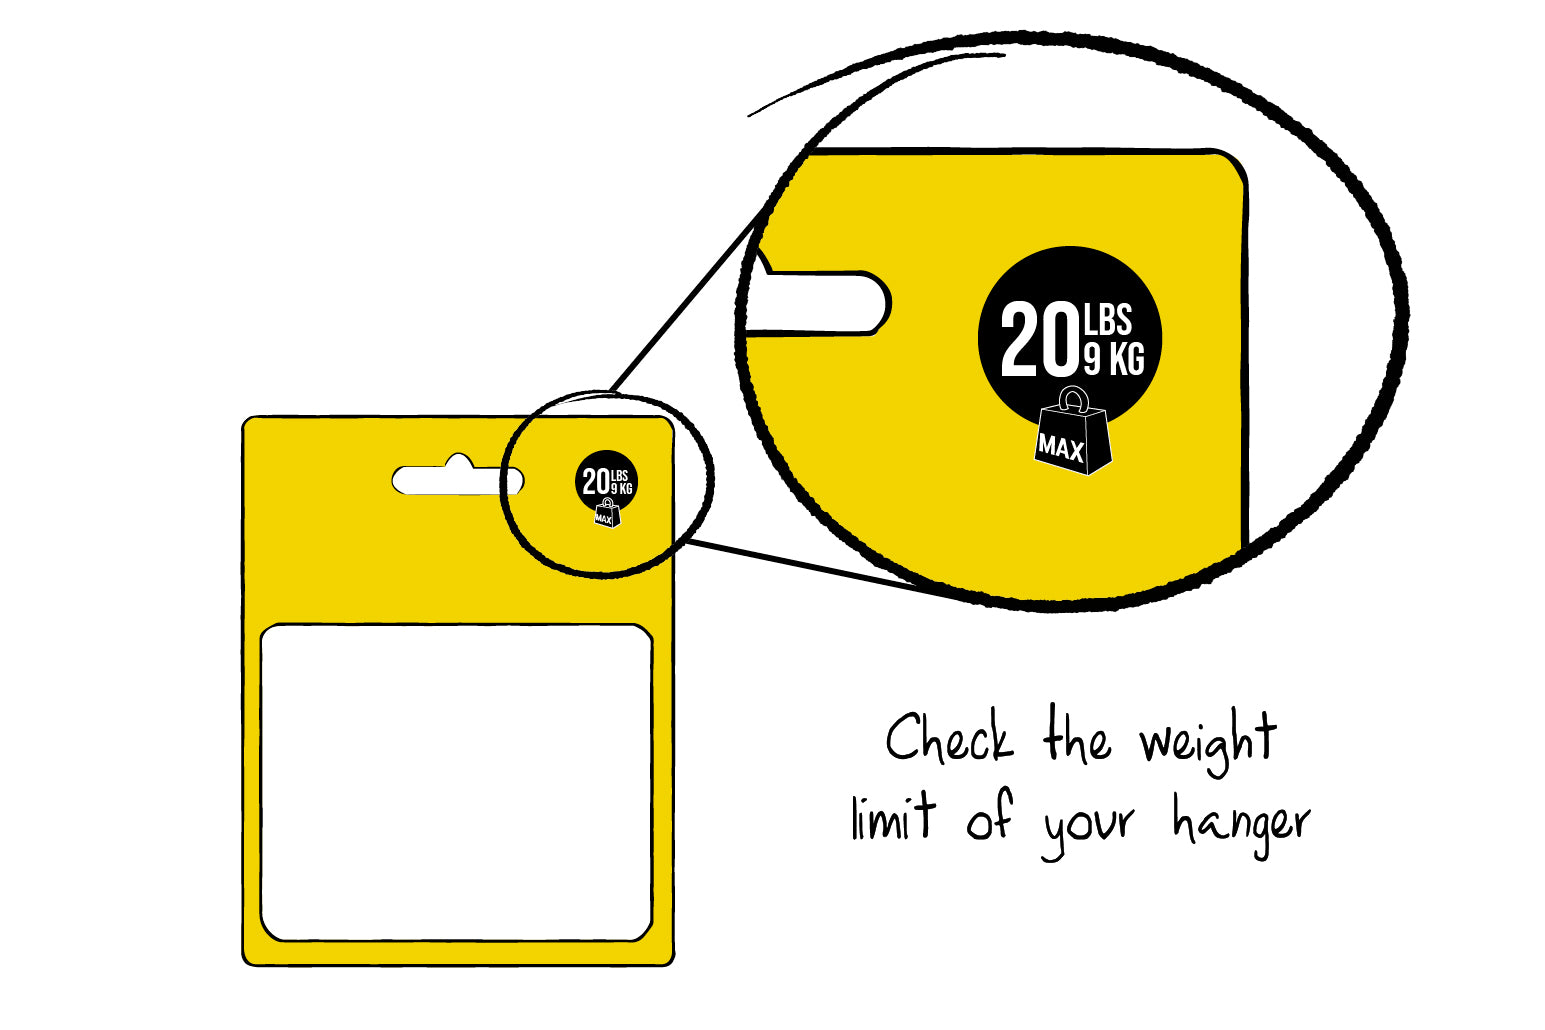 Illustration of a product package with a call out showing the weight rating for the product in the package.